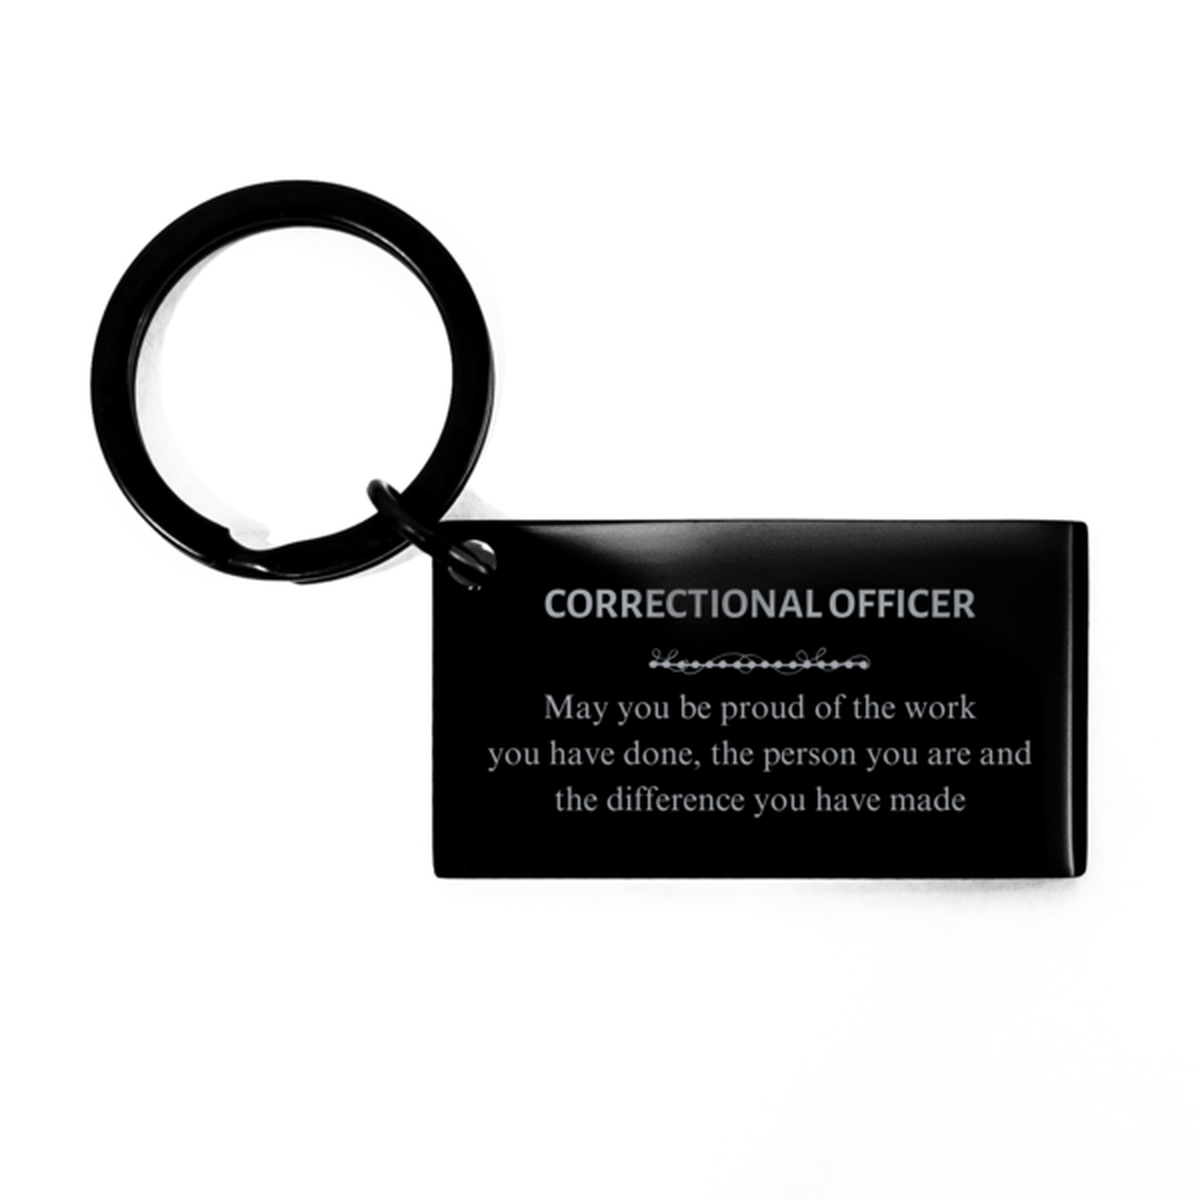 Fabricator May you be proud of the work you have done, Retirement Correctional Officer Keychain for Colleague Appreciation Gifts Amazing for Correctional Officer